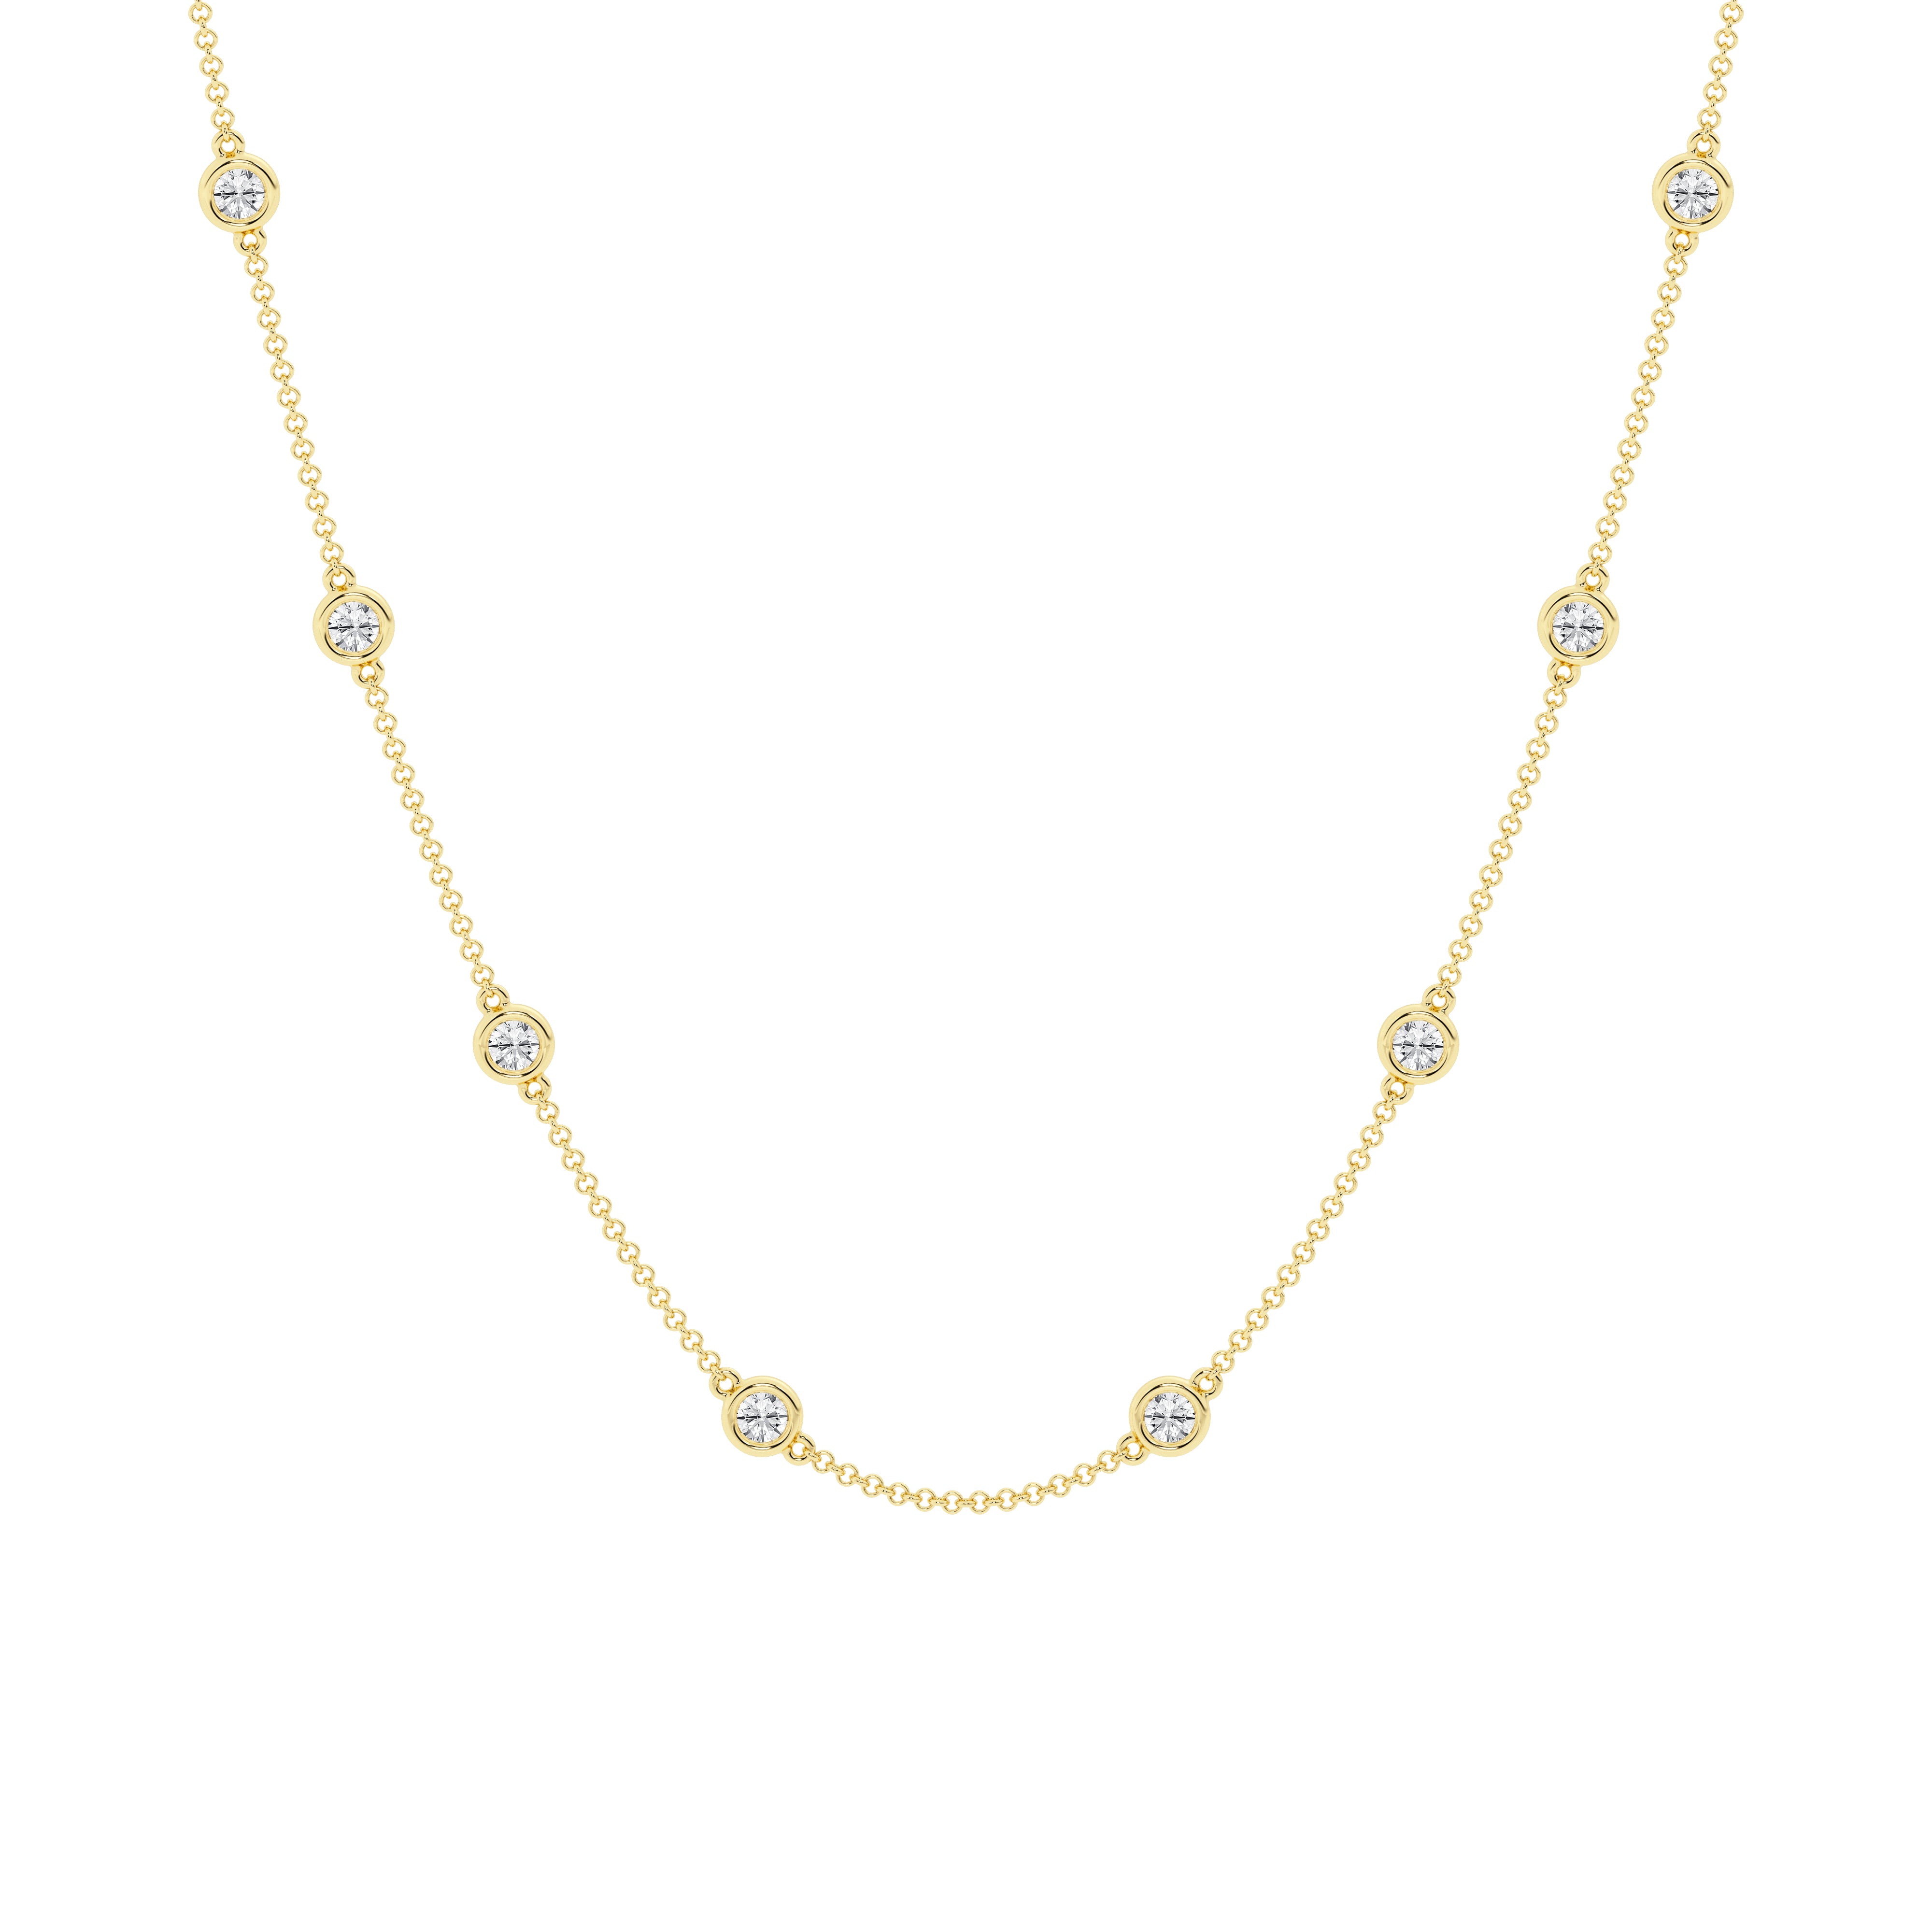 2 carat Diamond By the Yard Necklace